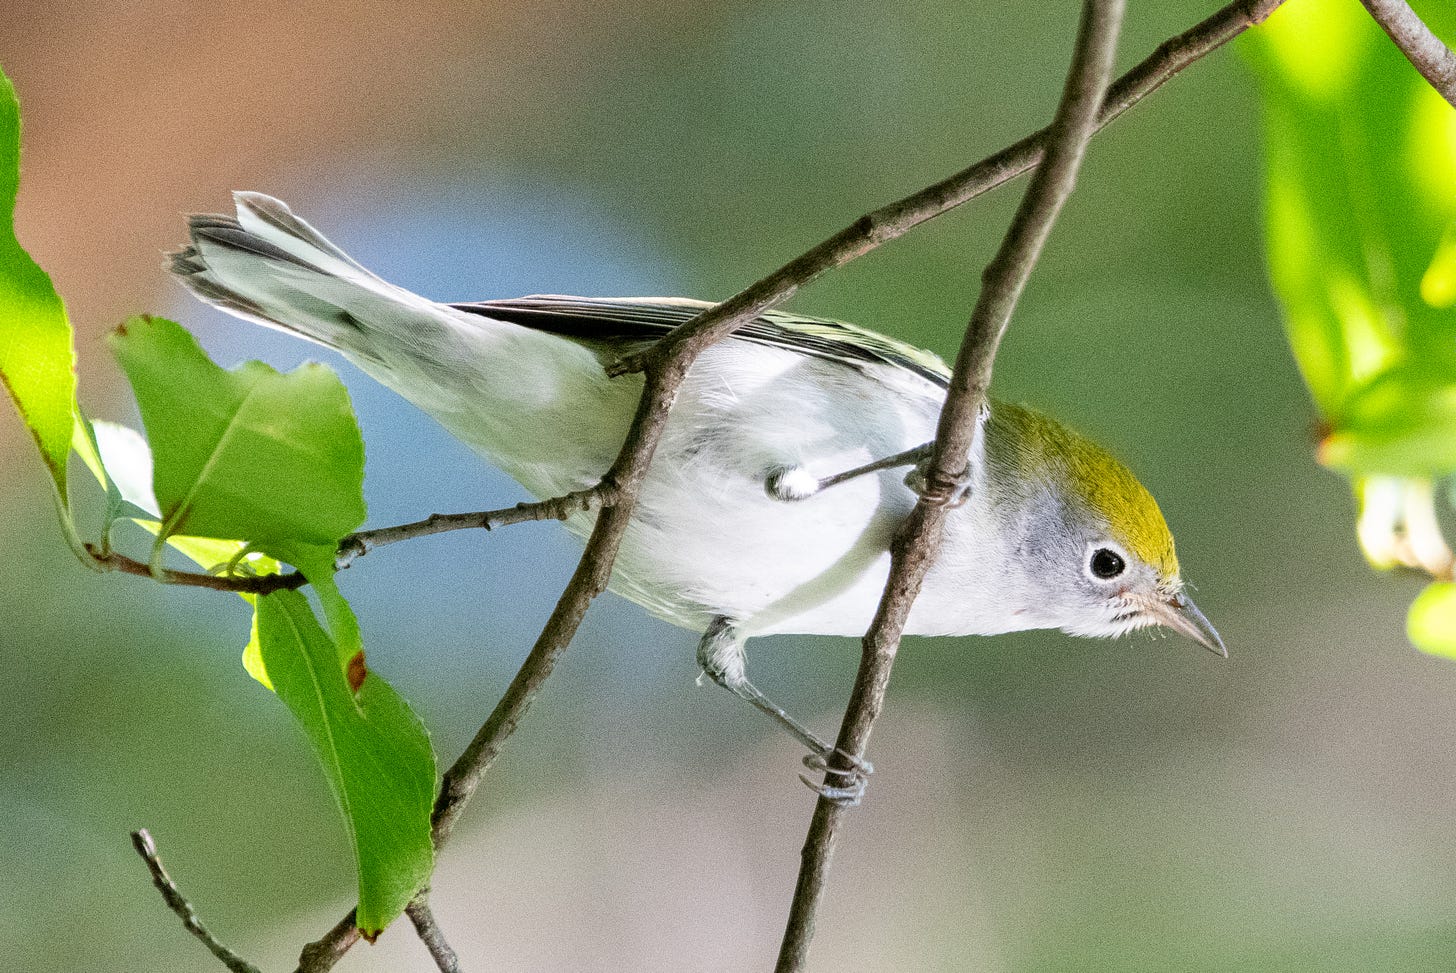 A small bird with a lime-green cap, a distinct white eyering, and a white belly is perched sideways on thin vertical branches